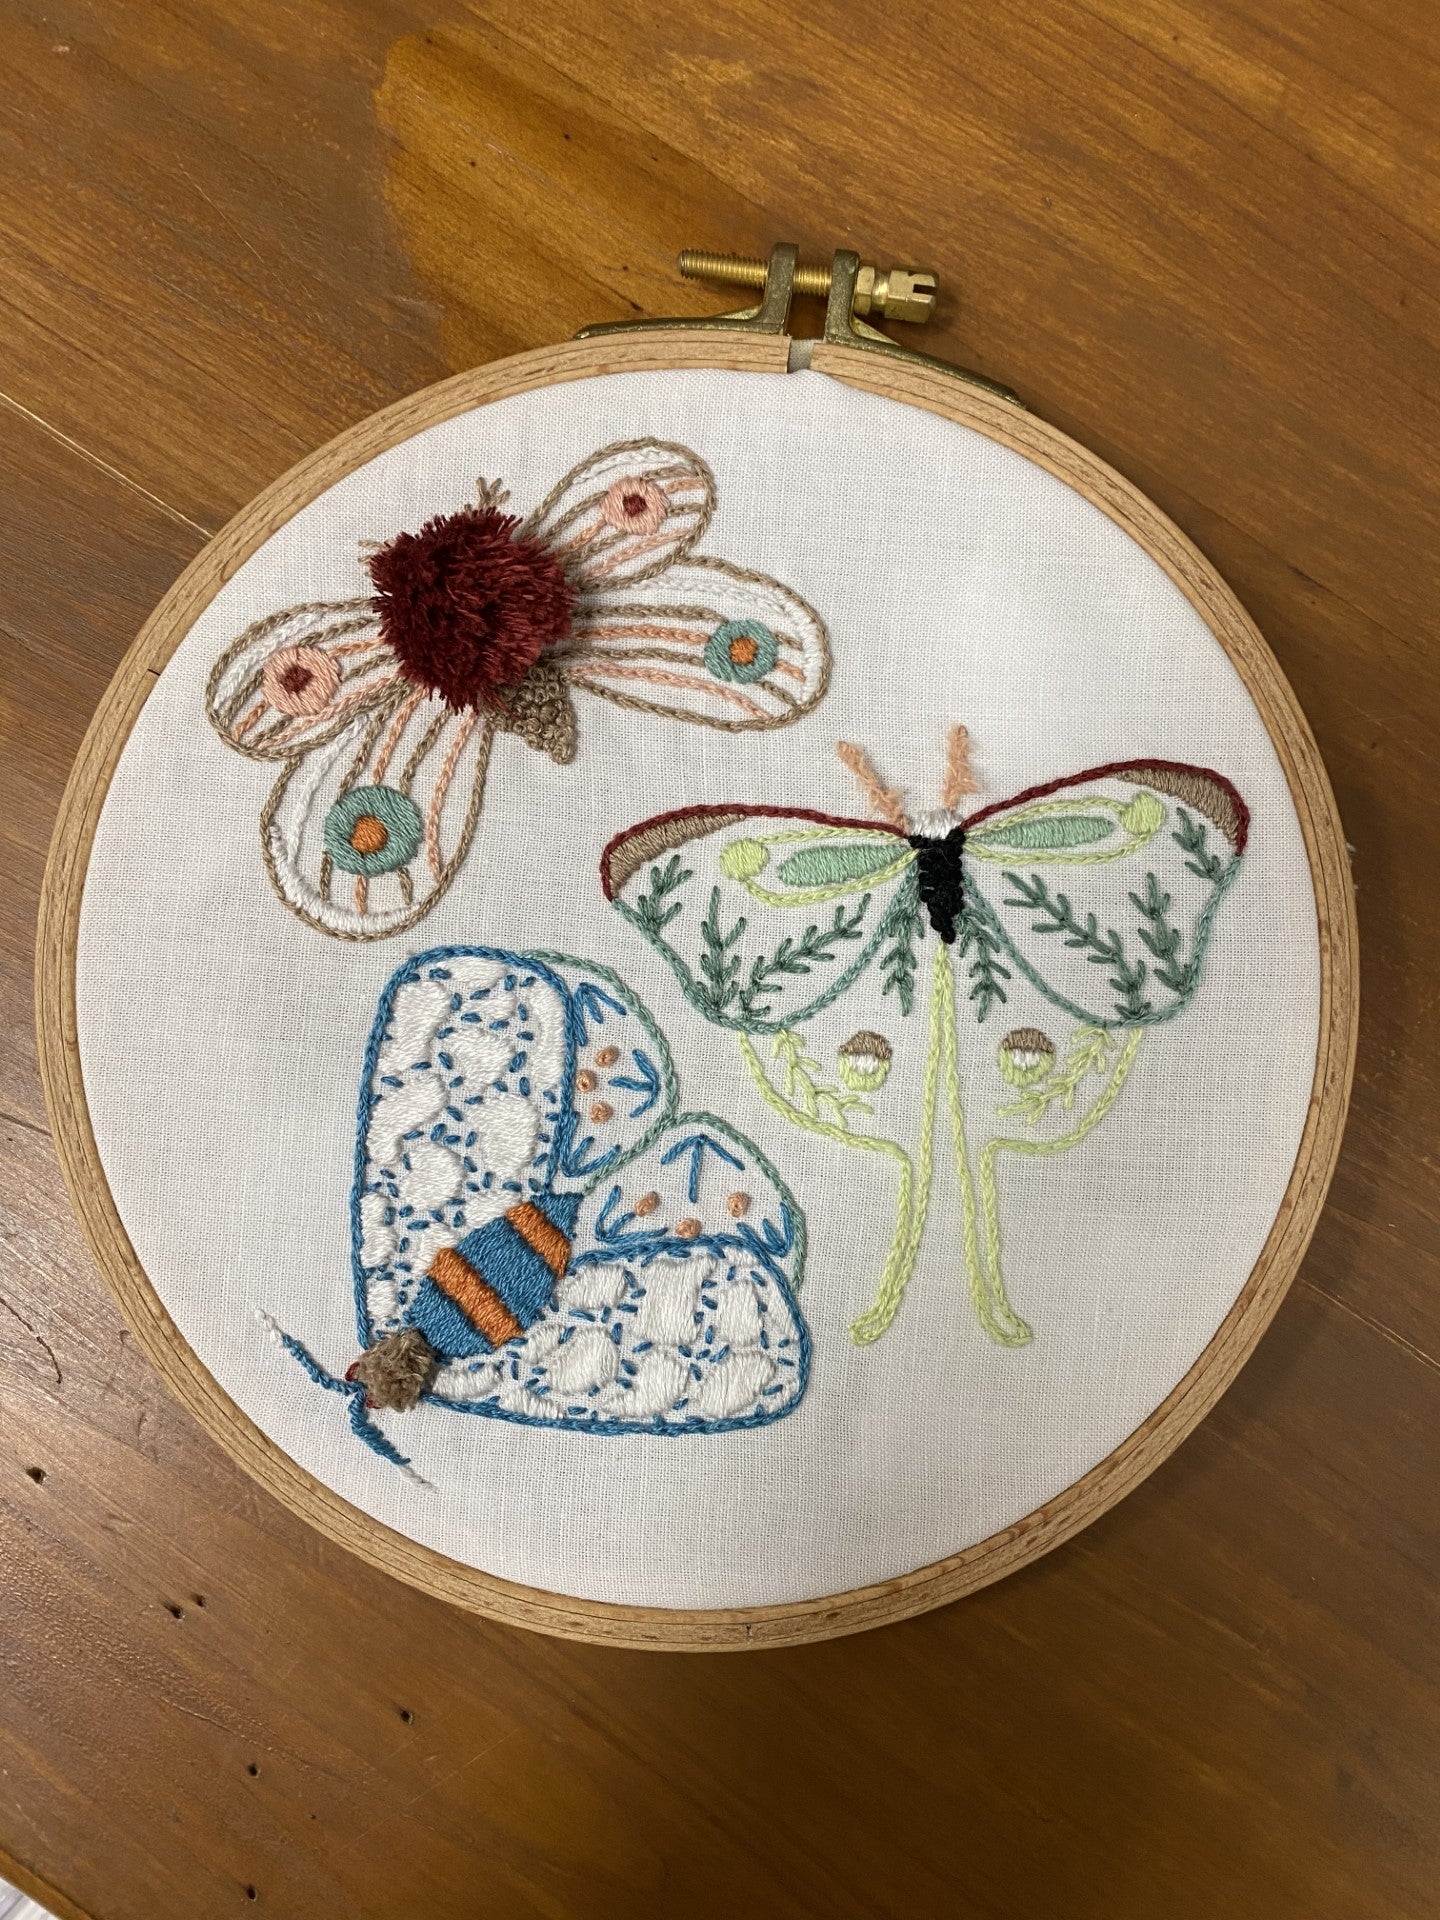 How to use Stick & Stitch to transfer your embroidery design - And